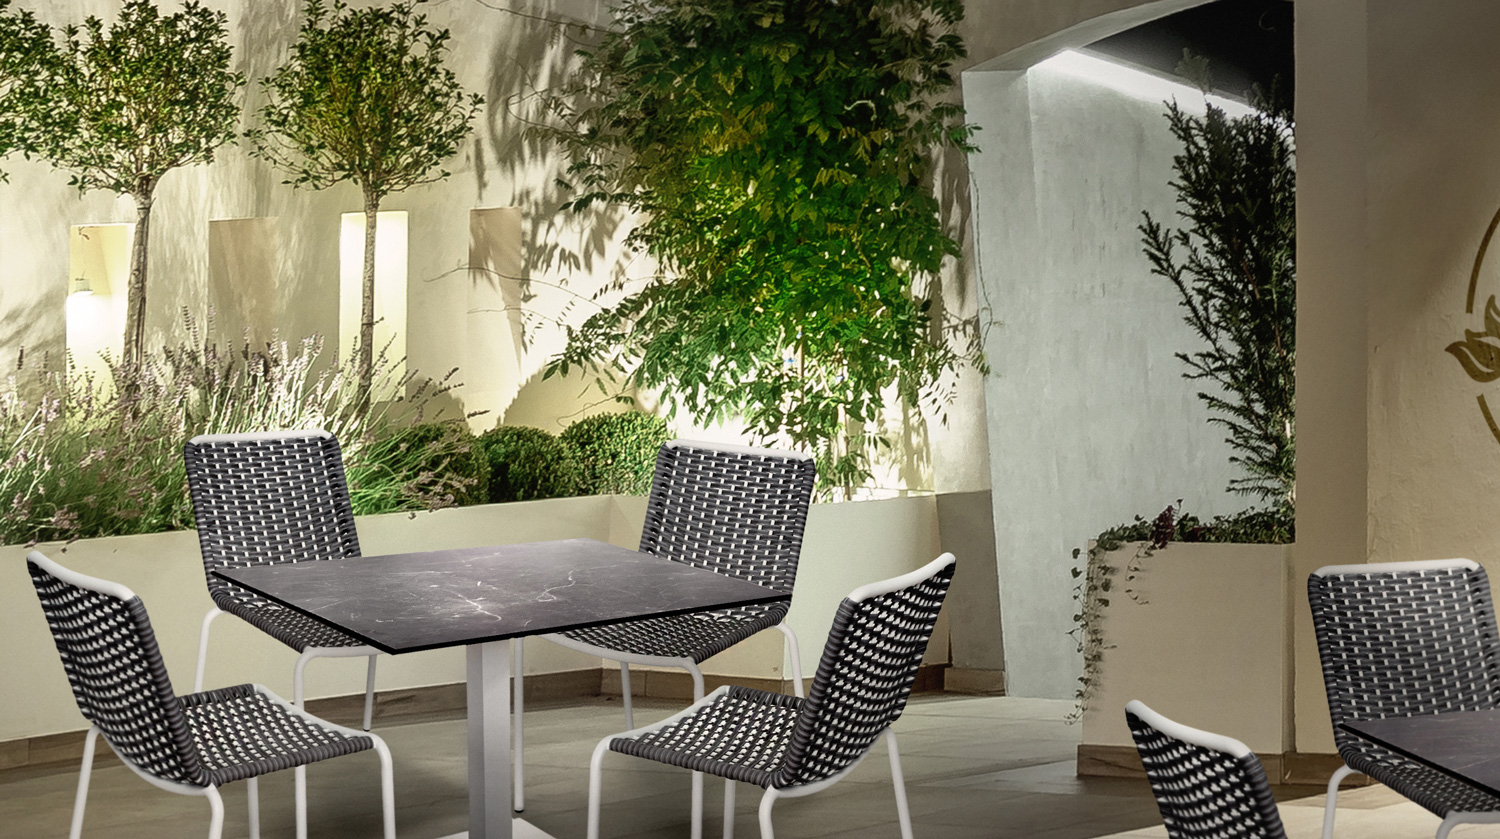 Clean Dining | Captiva Chairs with Pietro Tables in an dramatic outdoor dining courtyard